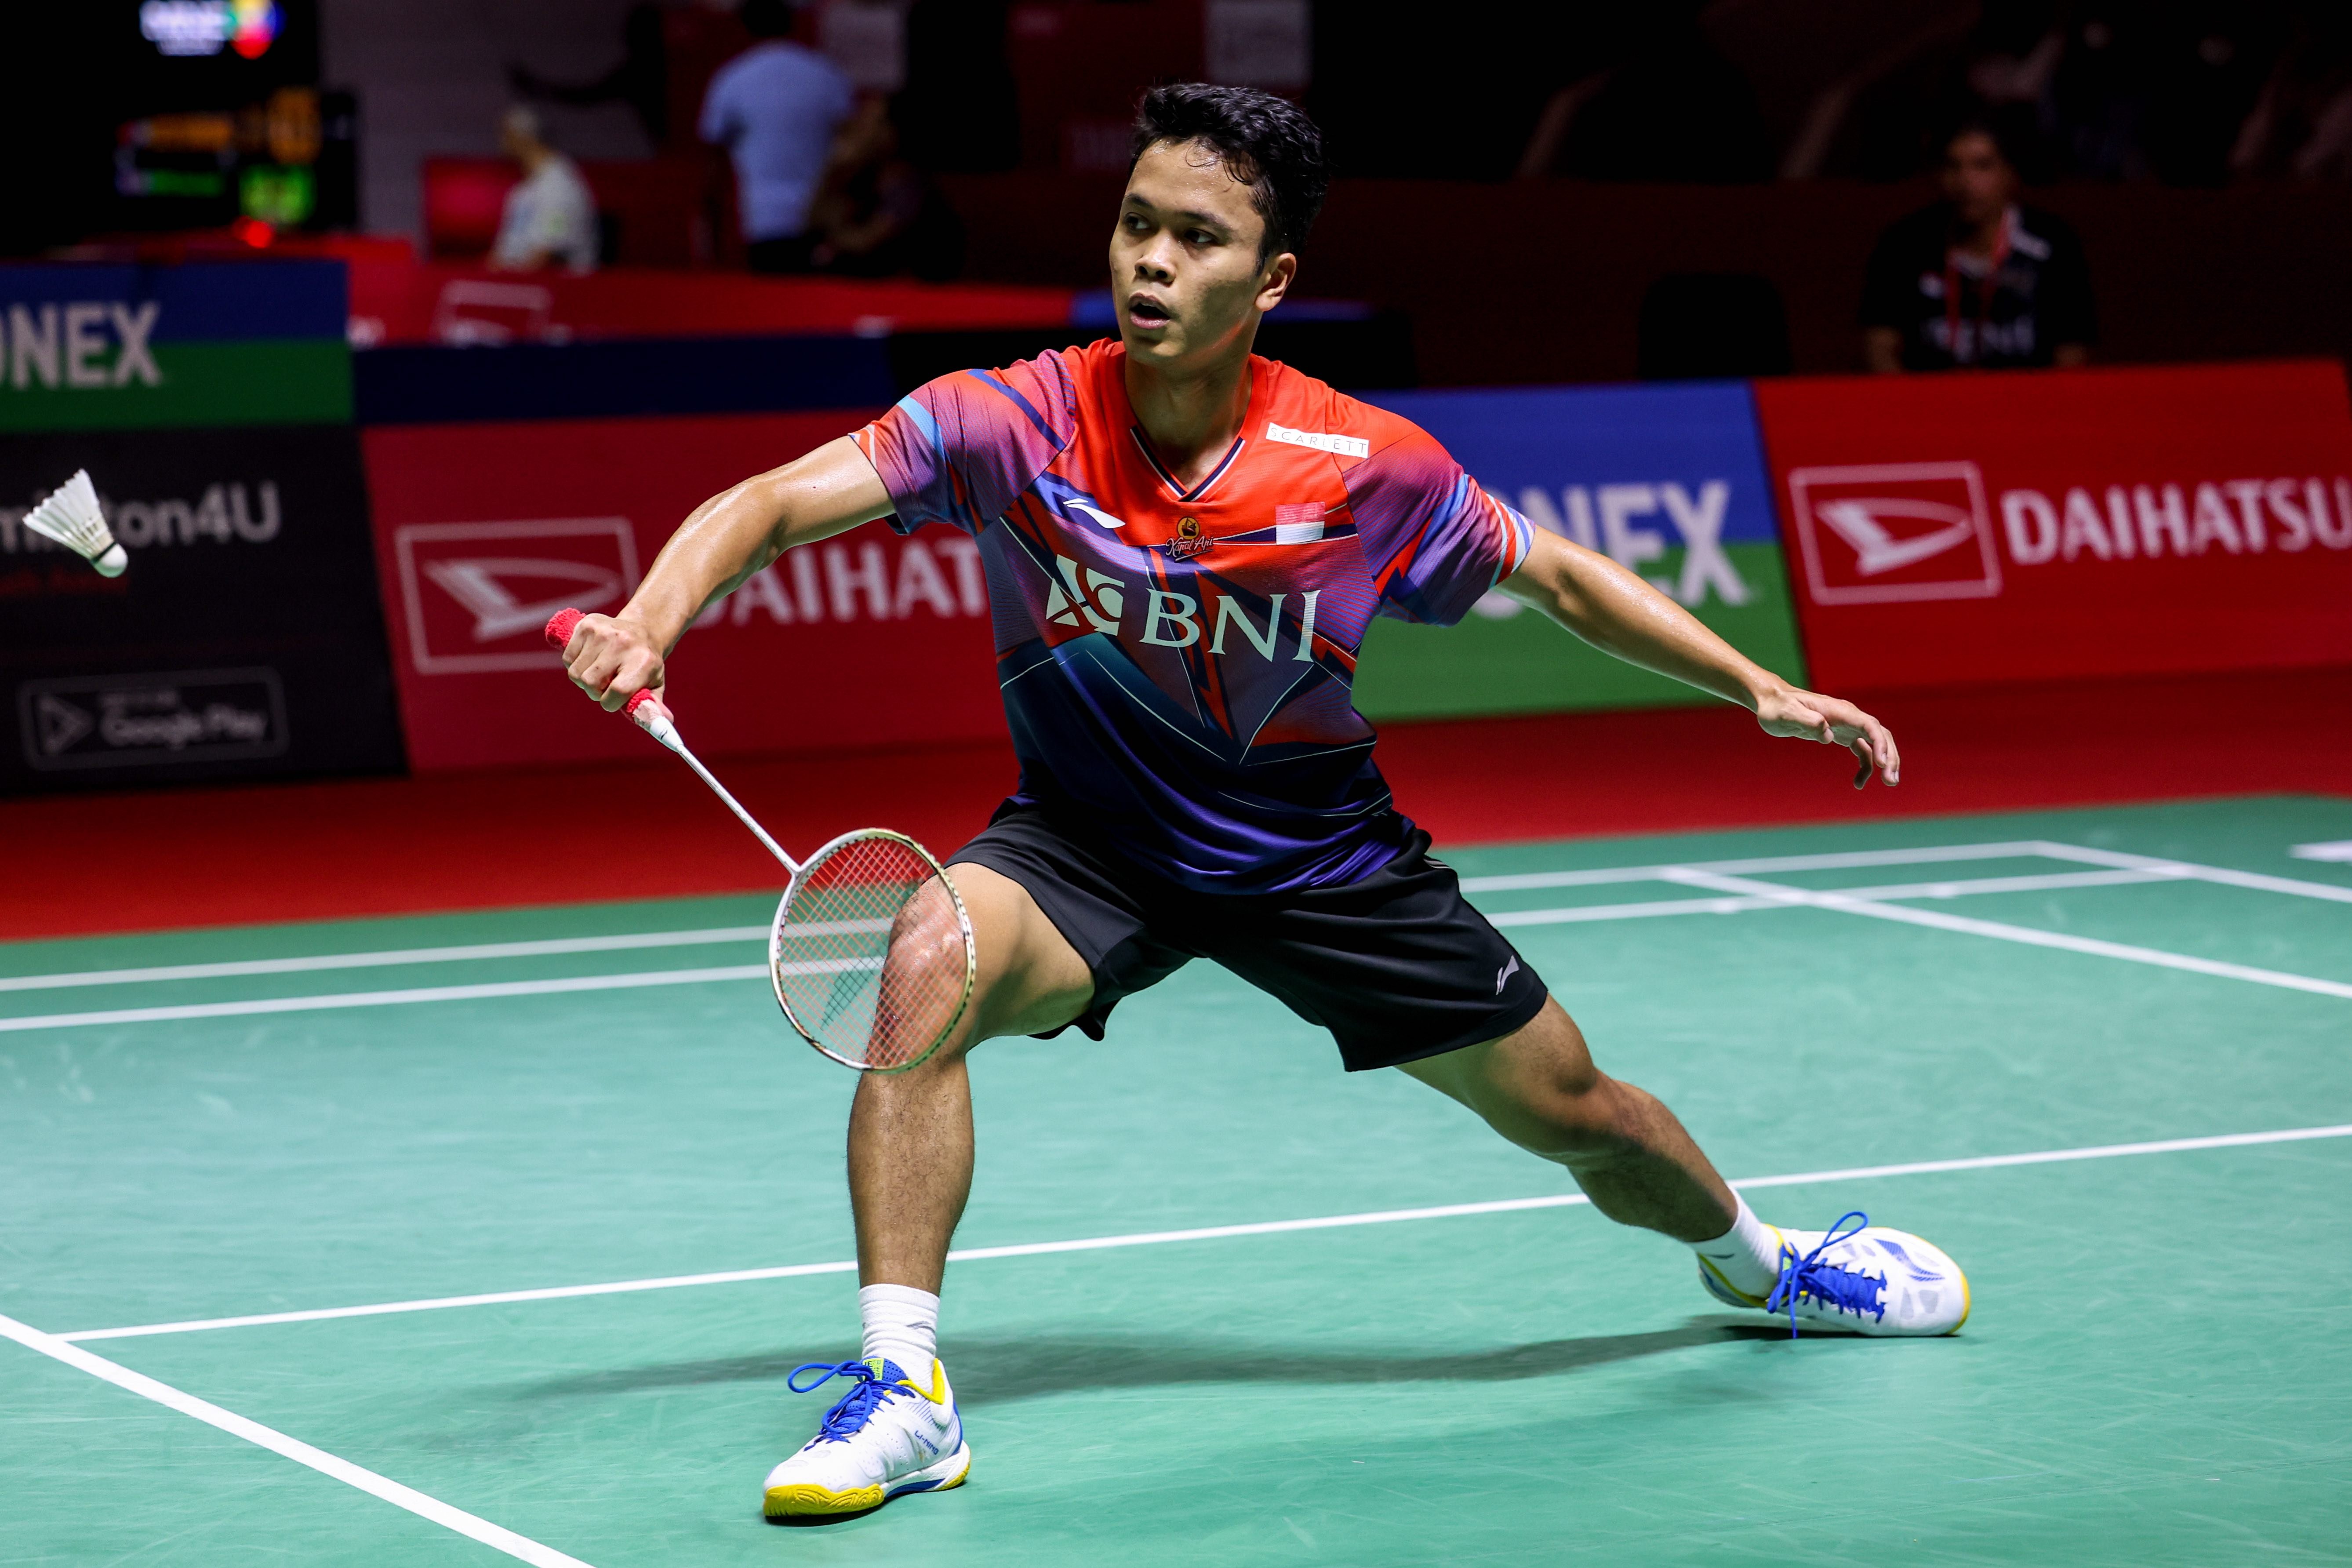 Mens Singles defending champion - Anthony Ginting (INA)